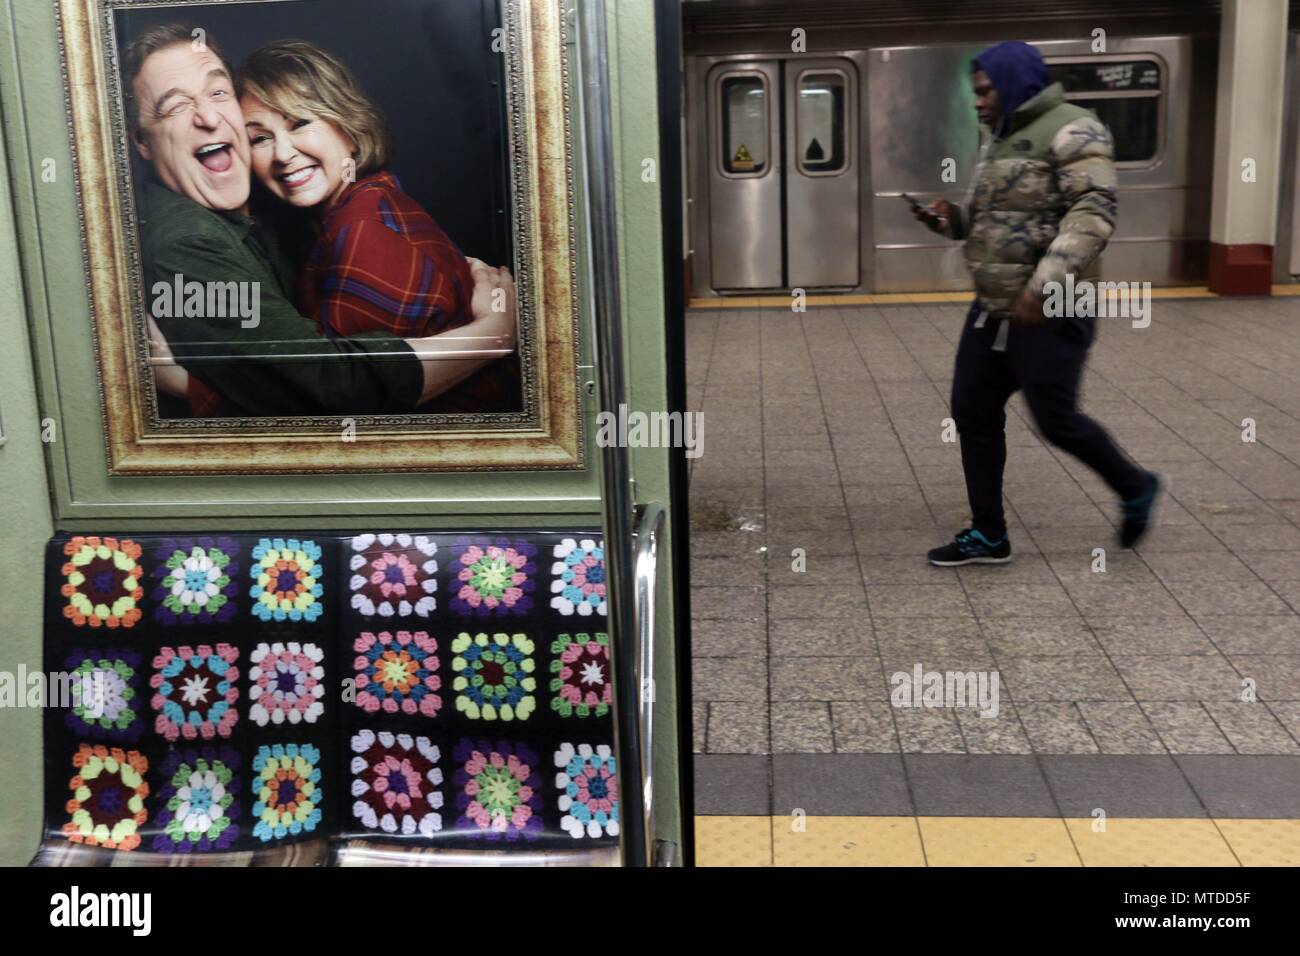 New York City, New York, USA. 6th Mar, 2018. Ahead of a reboot of the Nineteen Eighties television comedy series 'Roseanne' staring Roseanne Barr and John Goodman, the ABC Television Network has transformed a New York City subway car with the interior designed to look like the set of ''Roseanne, with giant portraits of the main characters, the TV familys patchwork quilt lining the seats, a fireplace and family photos. The ''Roseanne'' revival premieres March 27 on the ABC Network. Credit: 2018 G. Ronald Lopez/ZUMA Wire/Alamy Live News Stock Photo